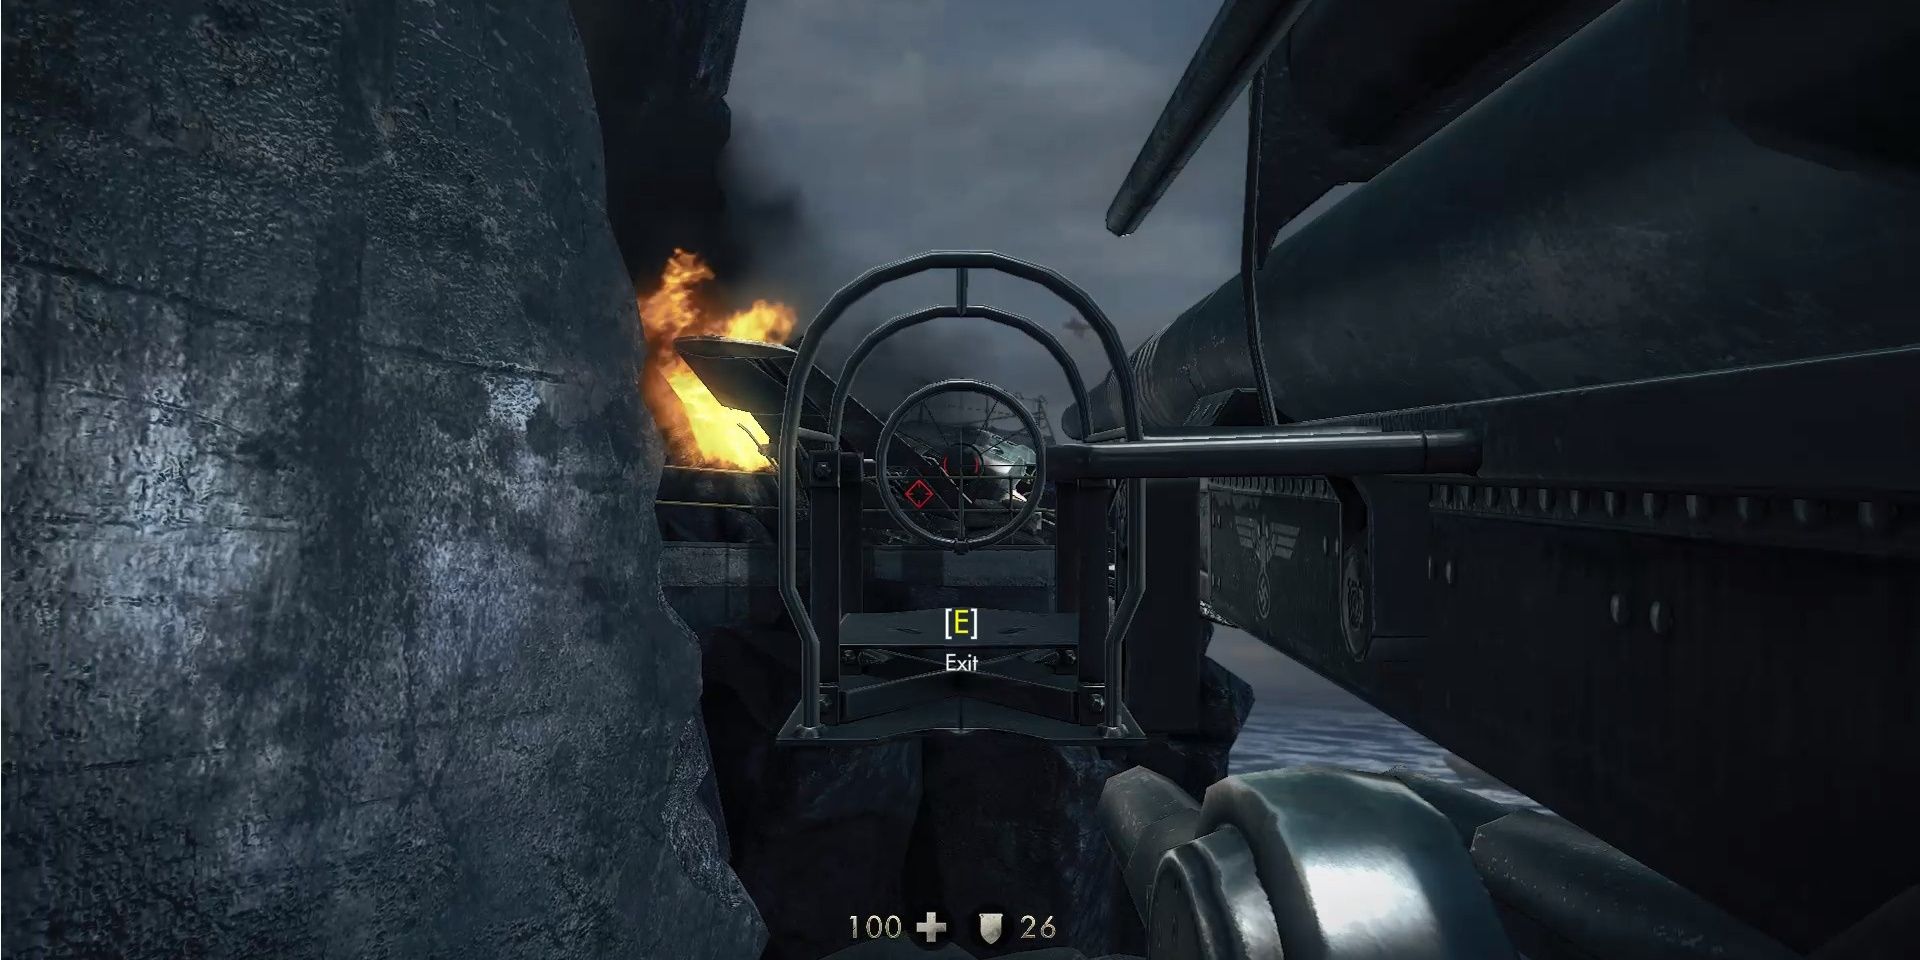 Image of the cannon being used in Wolfenstein: The New Order.